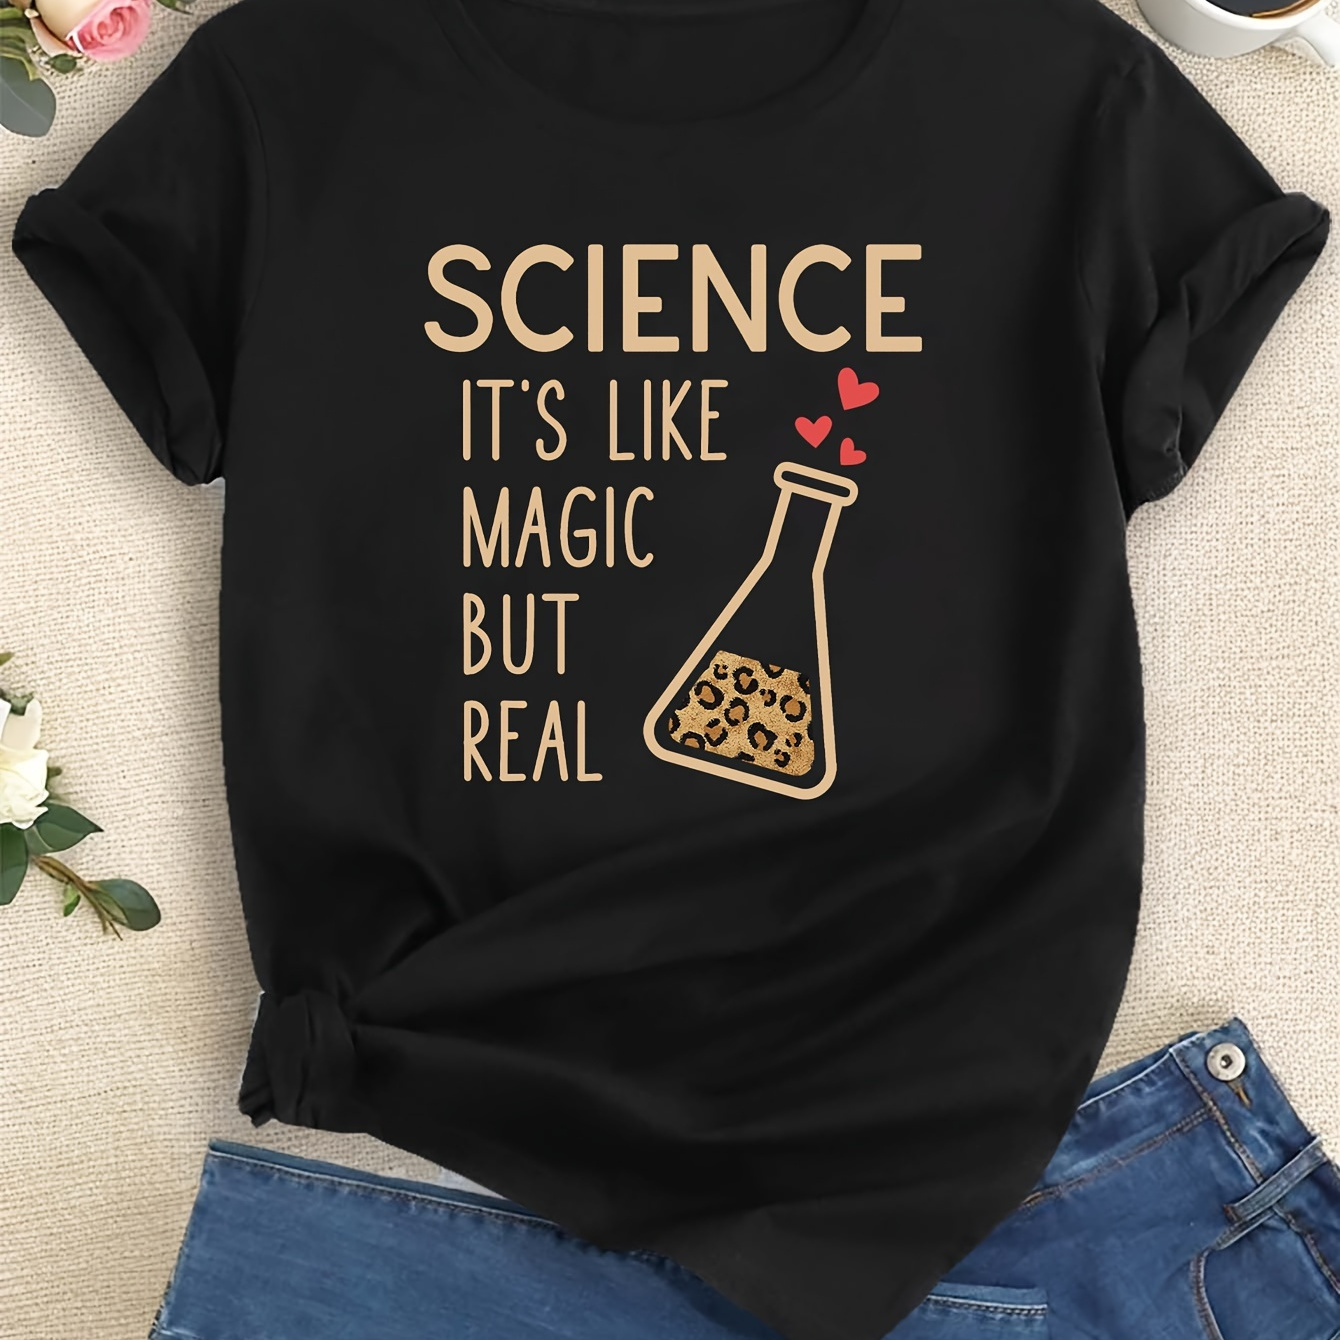 

Fashion Letters Science Print T-shirt, Short Sleeve Crew Neck Casual Top For Summer & Spring, Women's Clothing